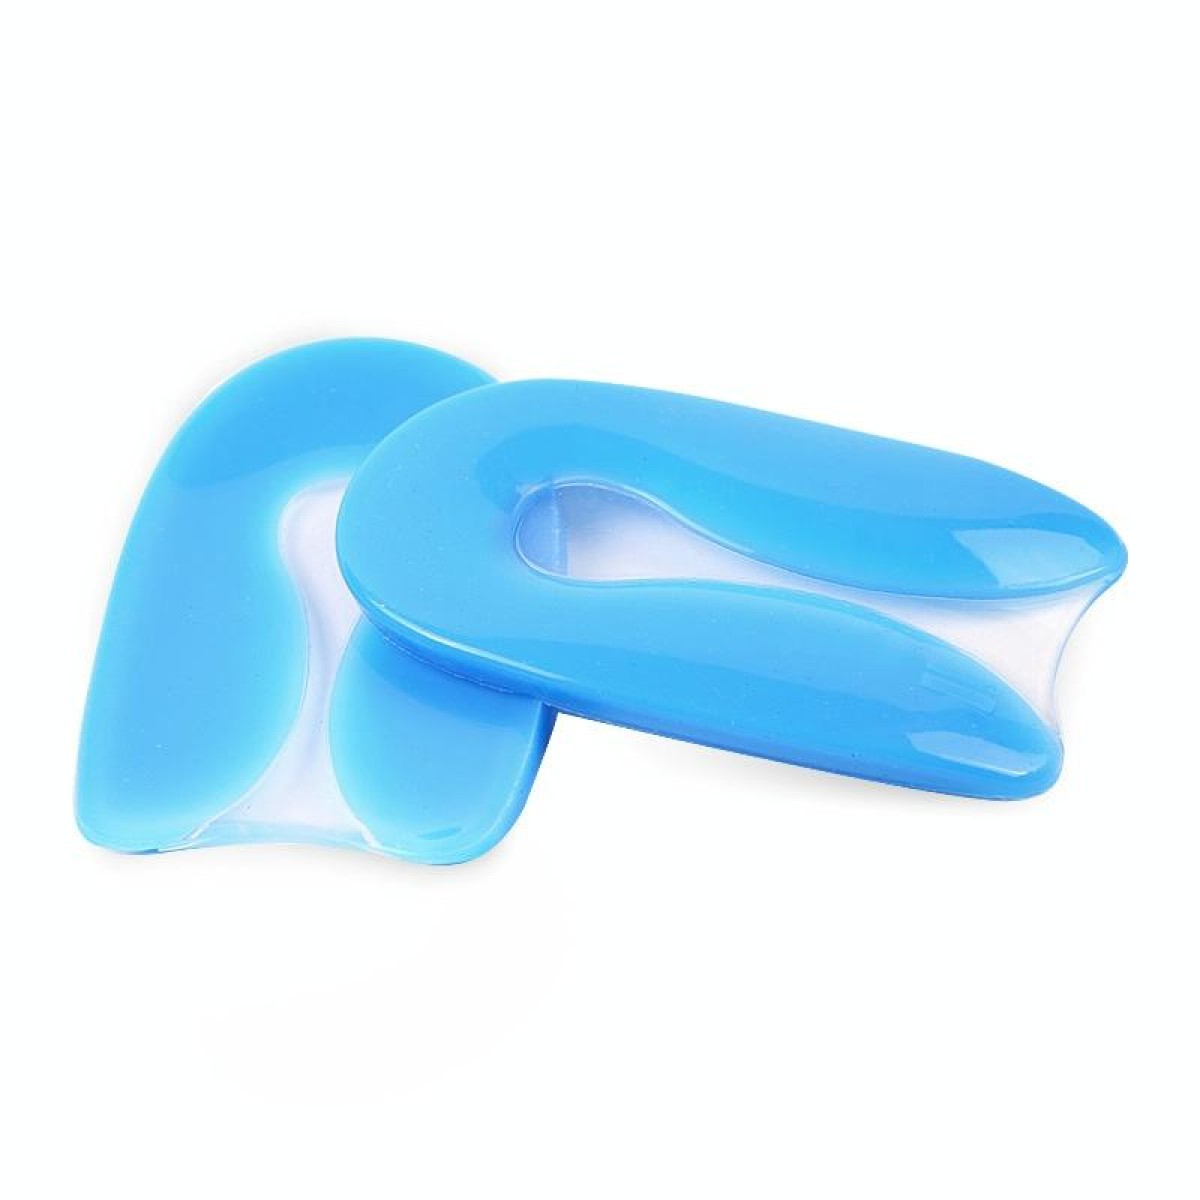 U-shaped Heel Pad Soft and Comfortable Shock Absorption Silicone Pad Insole, Size: L(40-45 Yards)